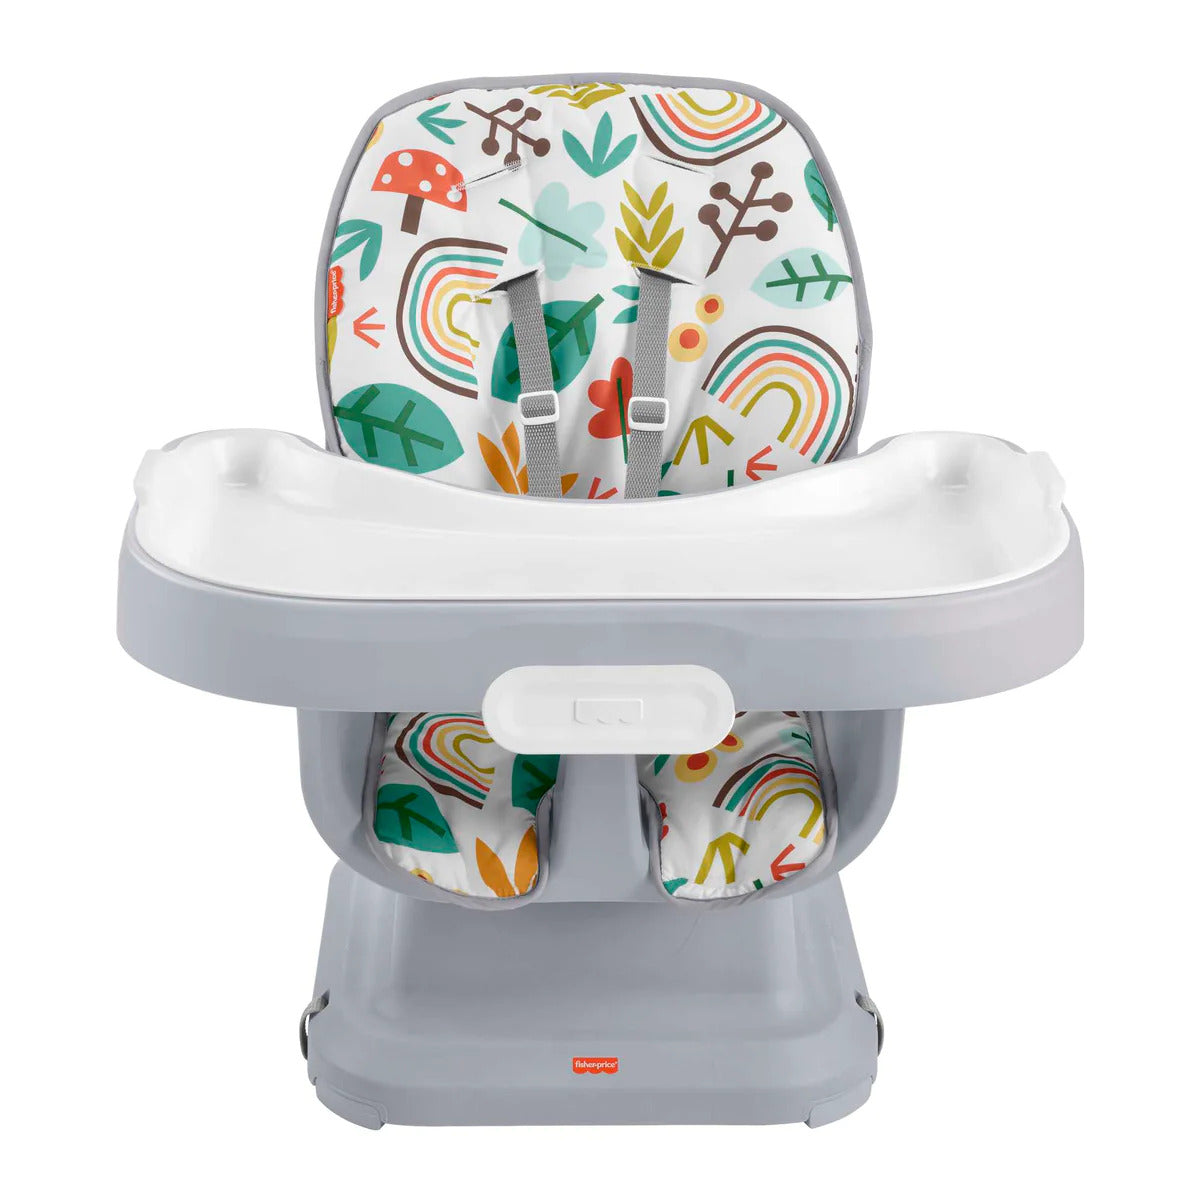 Fisher-Price SpaceSaver Simple Clean High Chair (Whimsical)